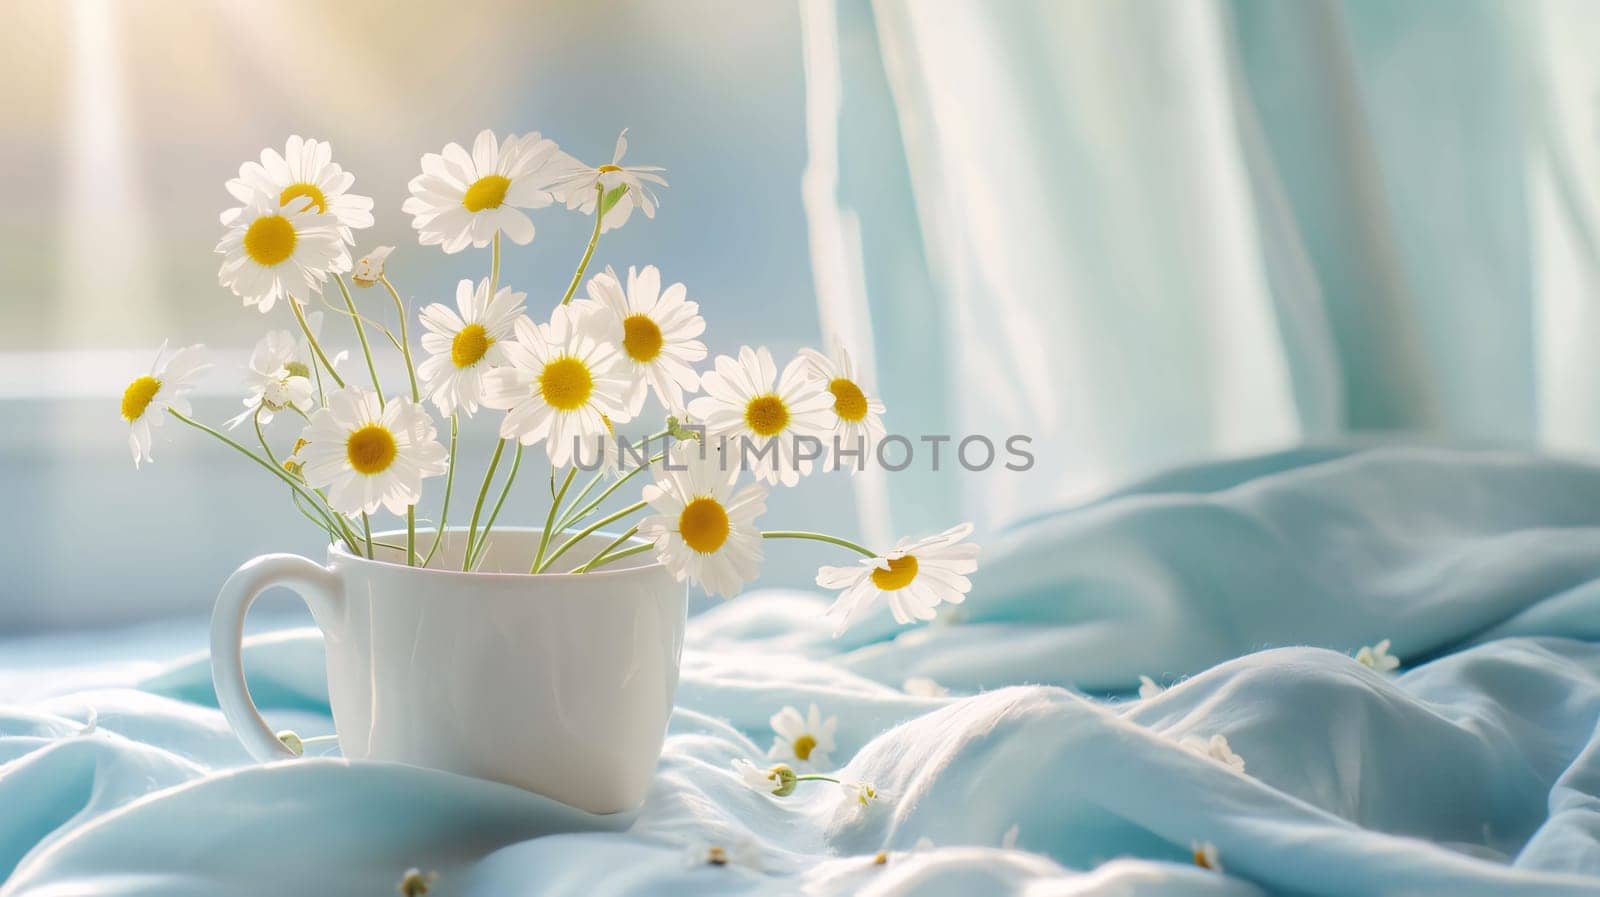 White daisies in White cup around white fabric banner with space for your own content. Flowering flowers, a symbol of spring, new life. A joyful time of nature waking up to life.